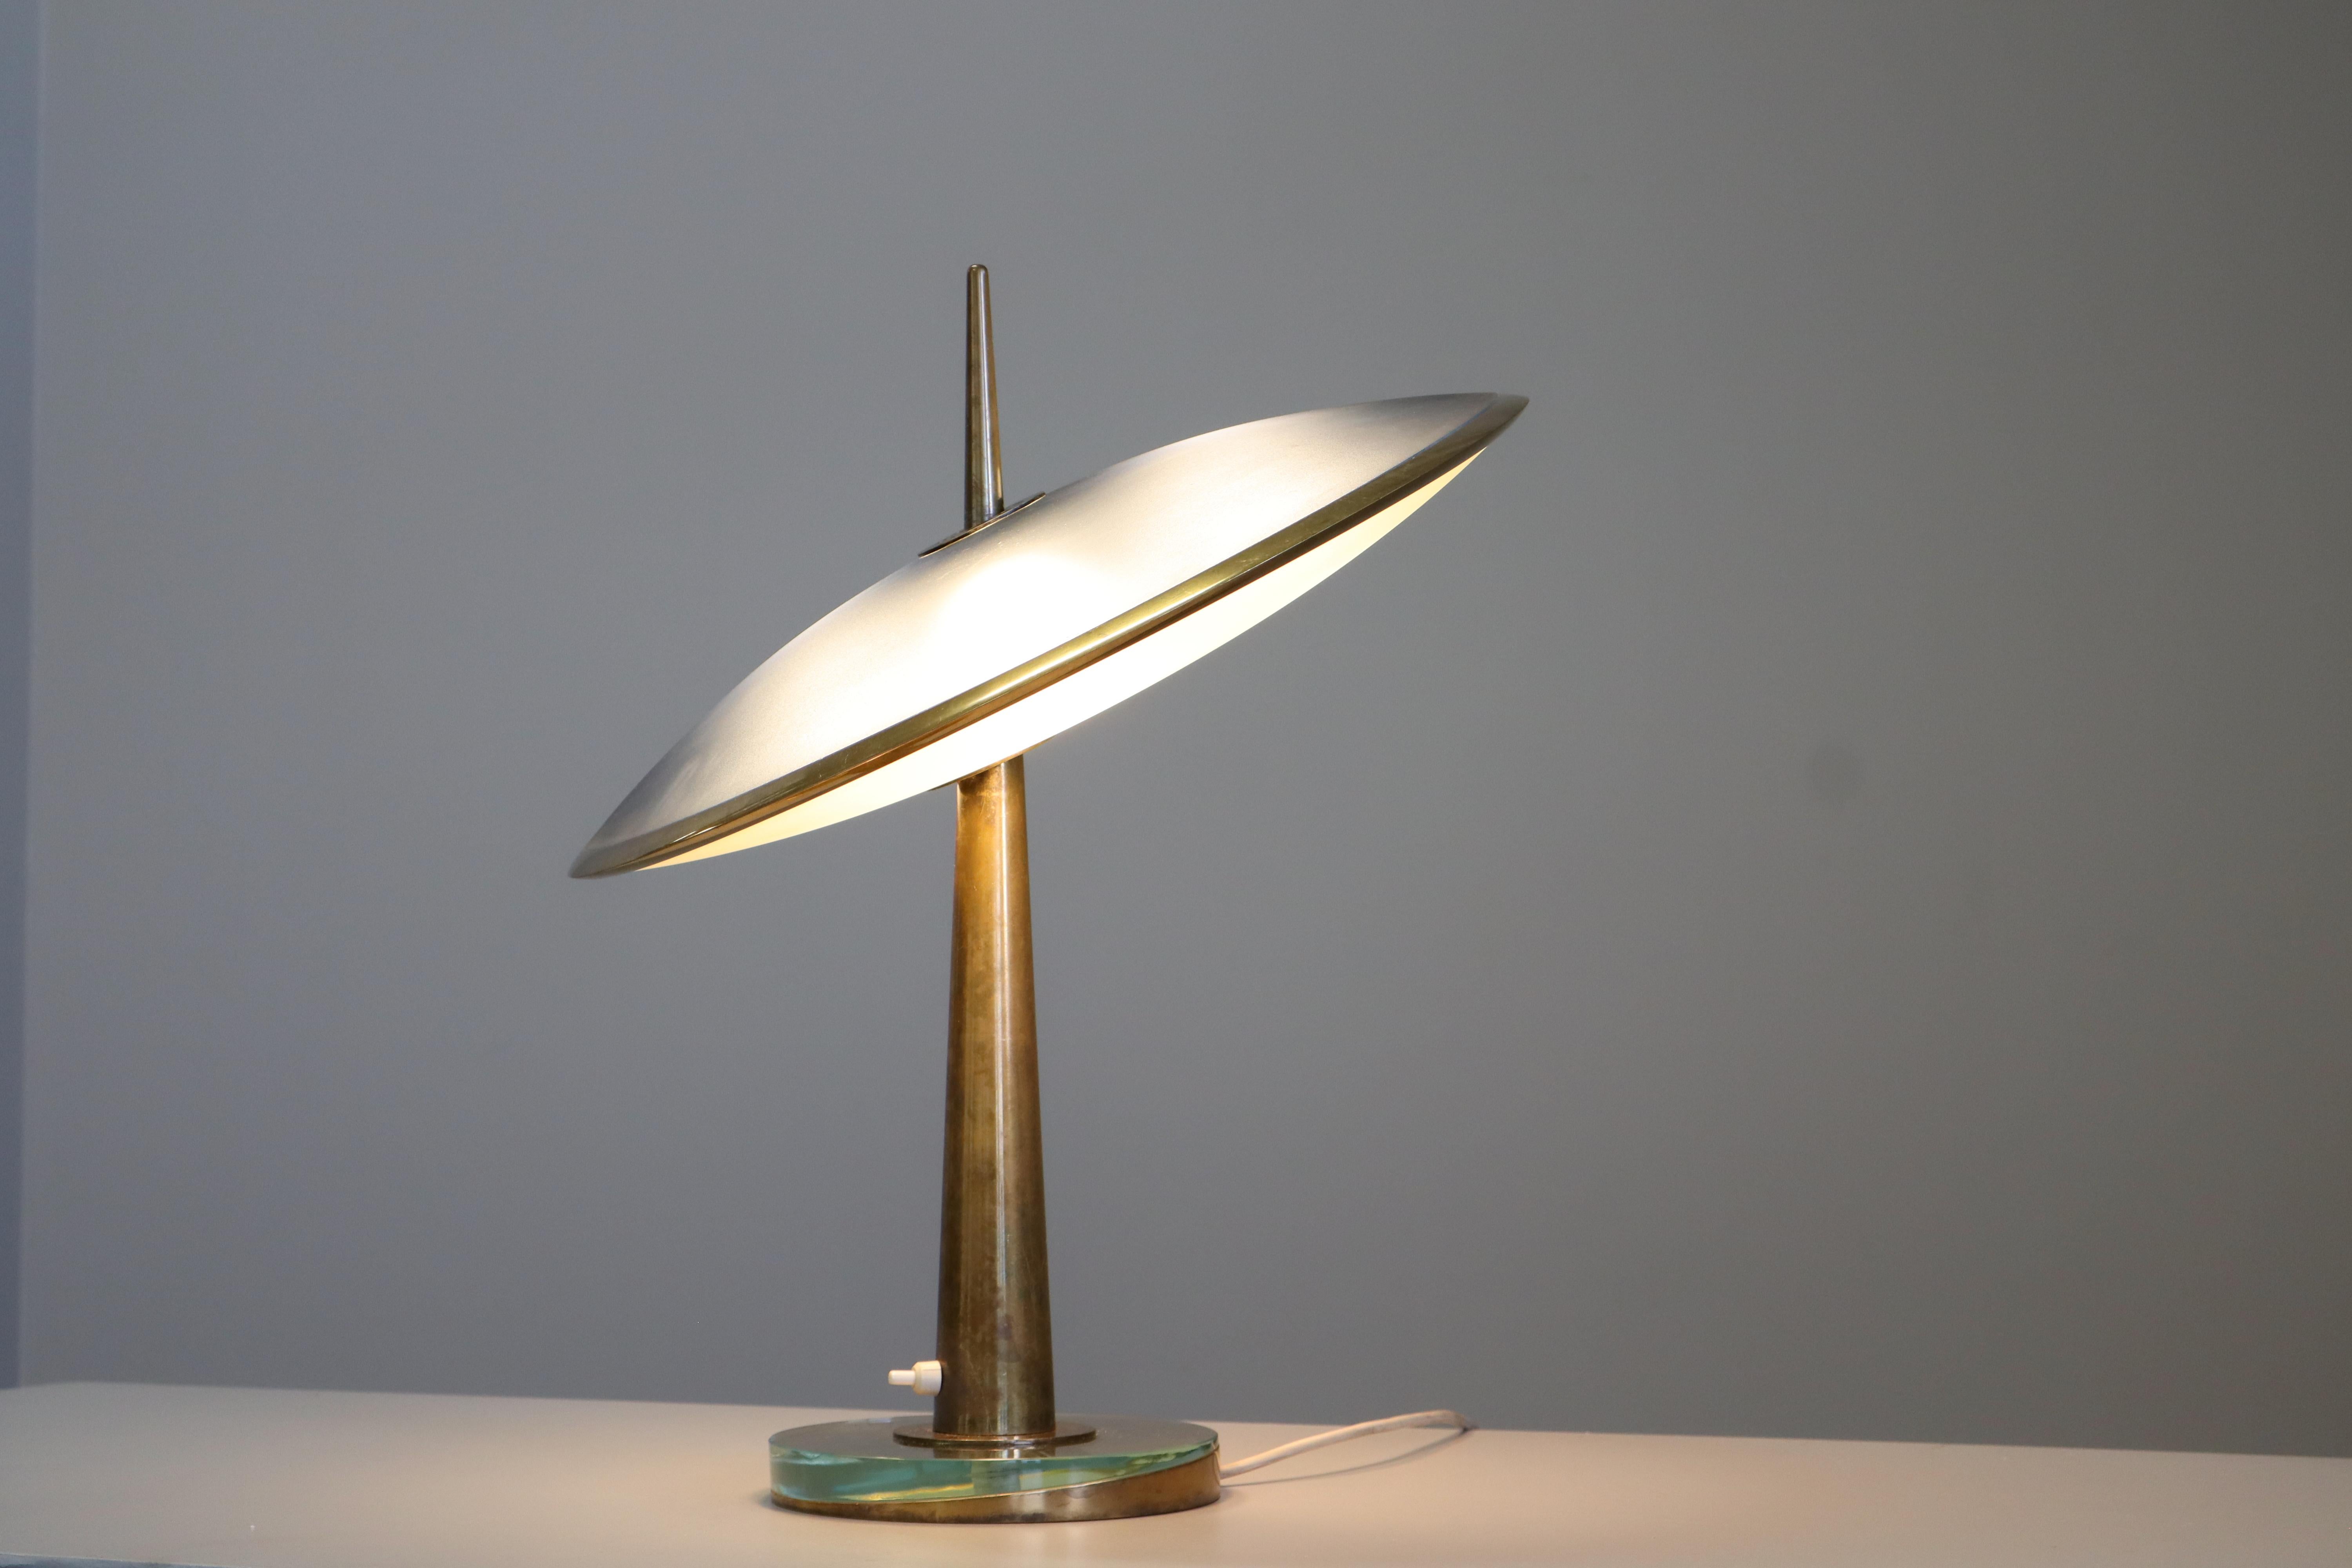 Rare Max Ingrand Lamp Fontana Arte Disco Volante Mod. 1538, Italy, 1955 . 
Formidable iconic table light with many astonishing details. Max Ingrand who was the artistic director at Fontana arte between 1954-1964 was the man of the impossible details